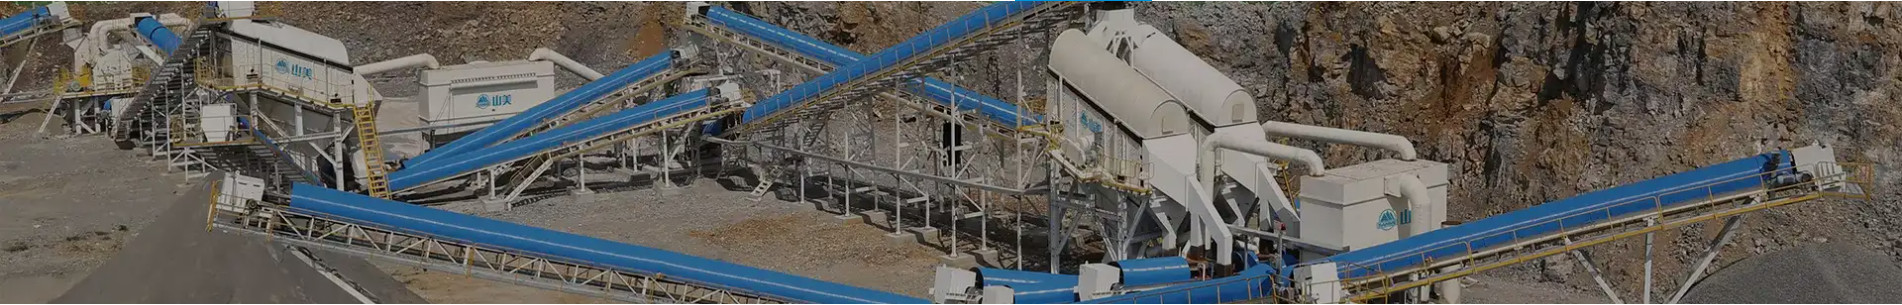 250 T/H Granite Crushing And Screening Production Line In India